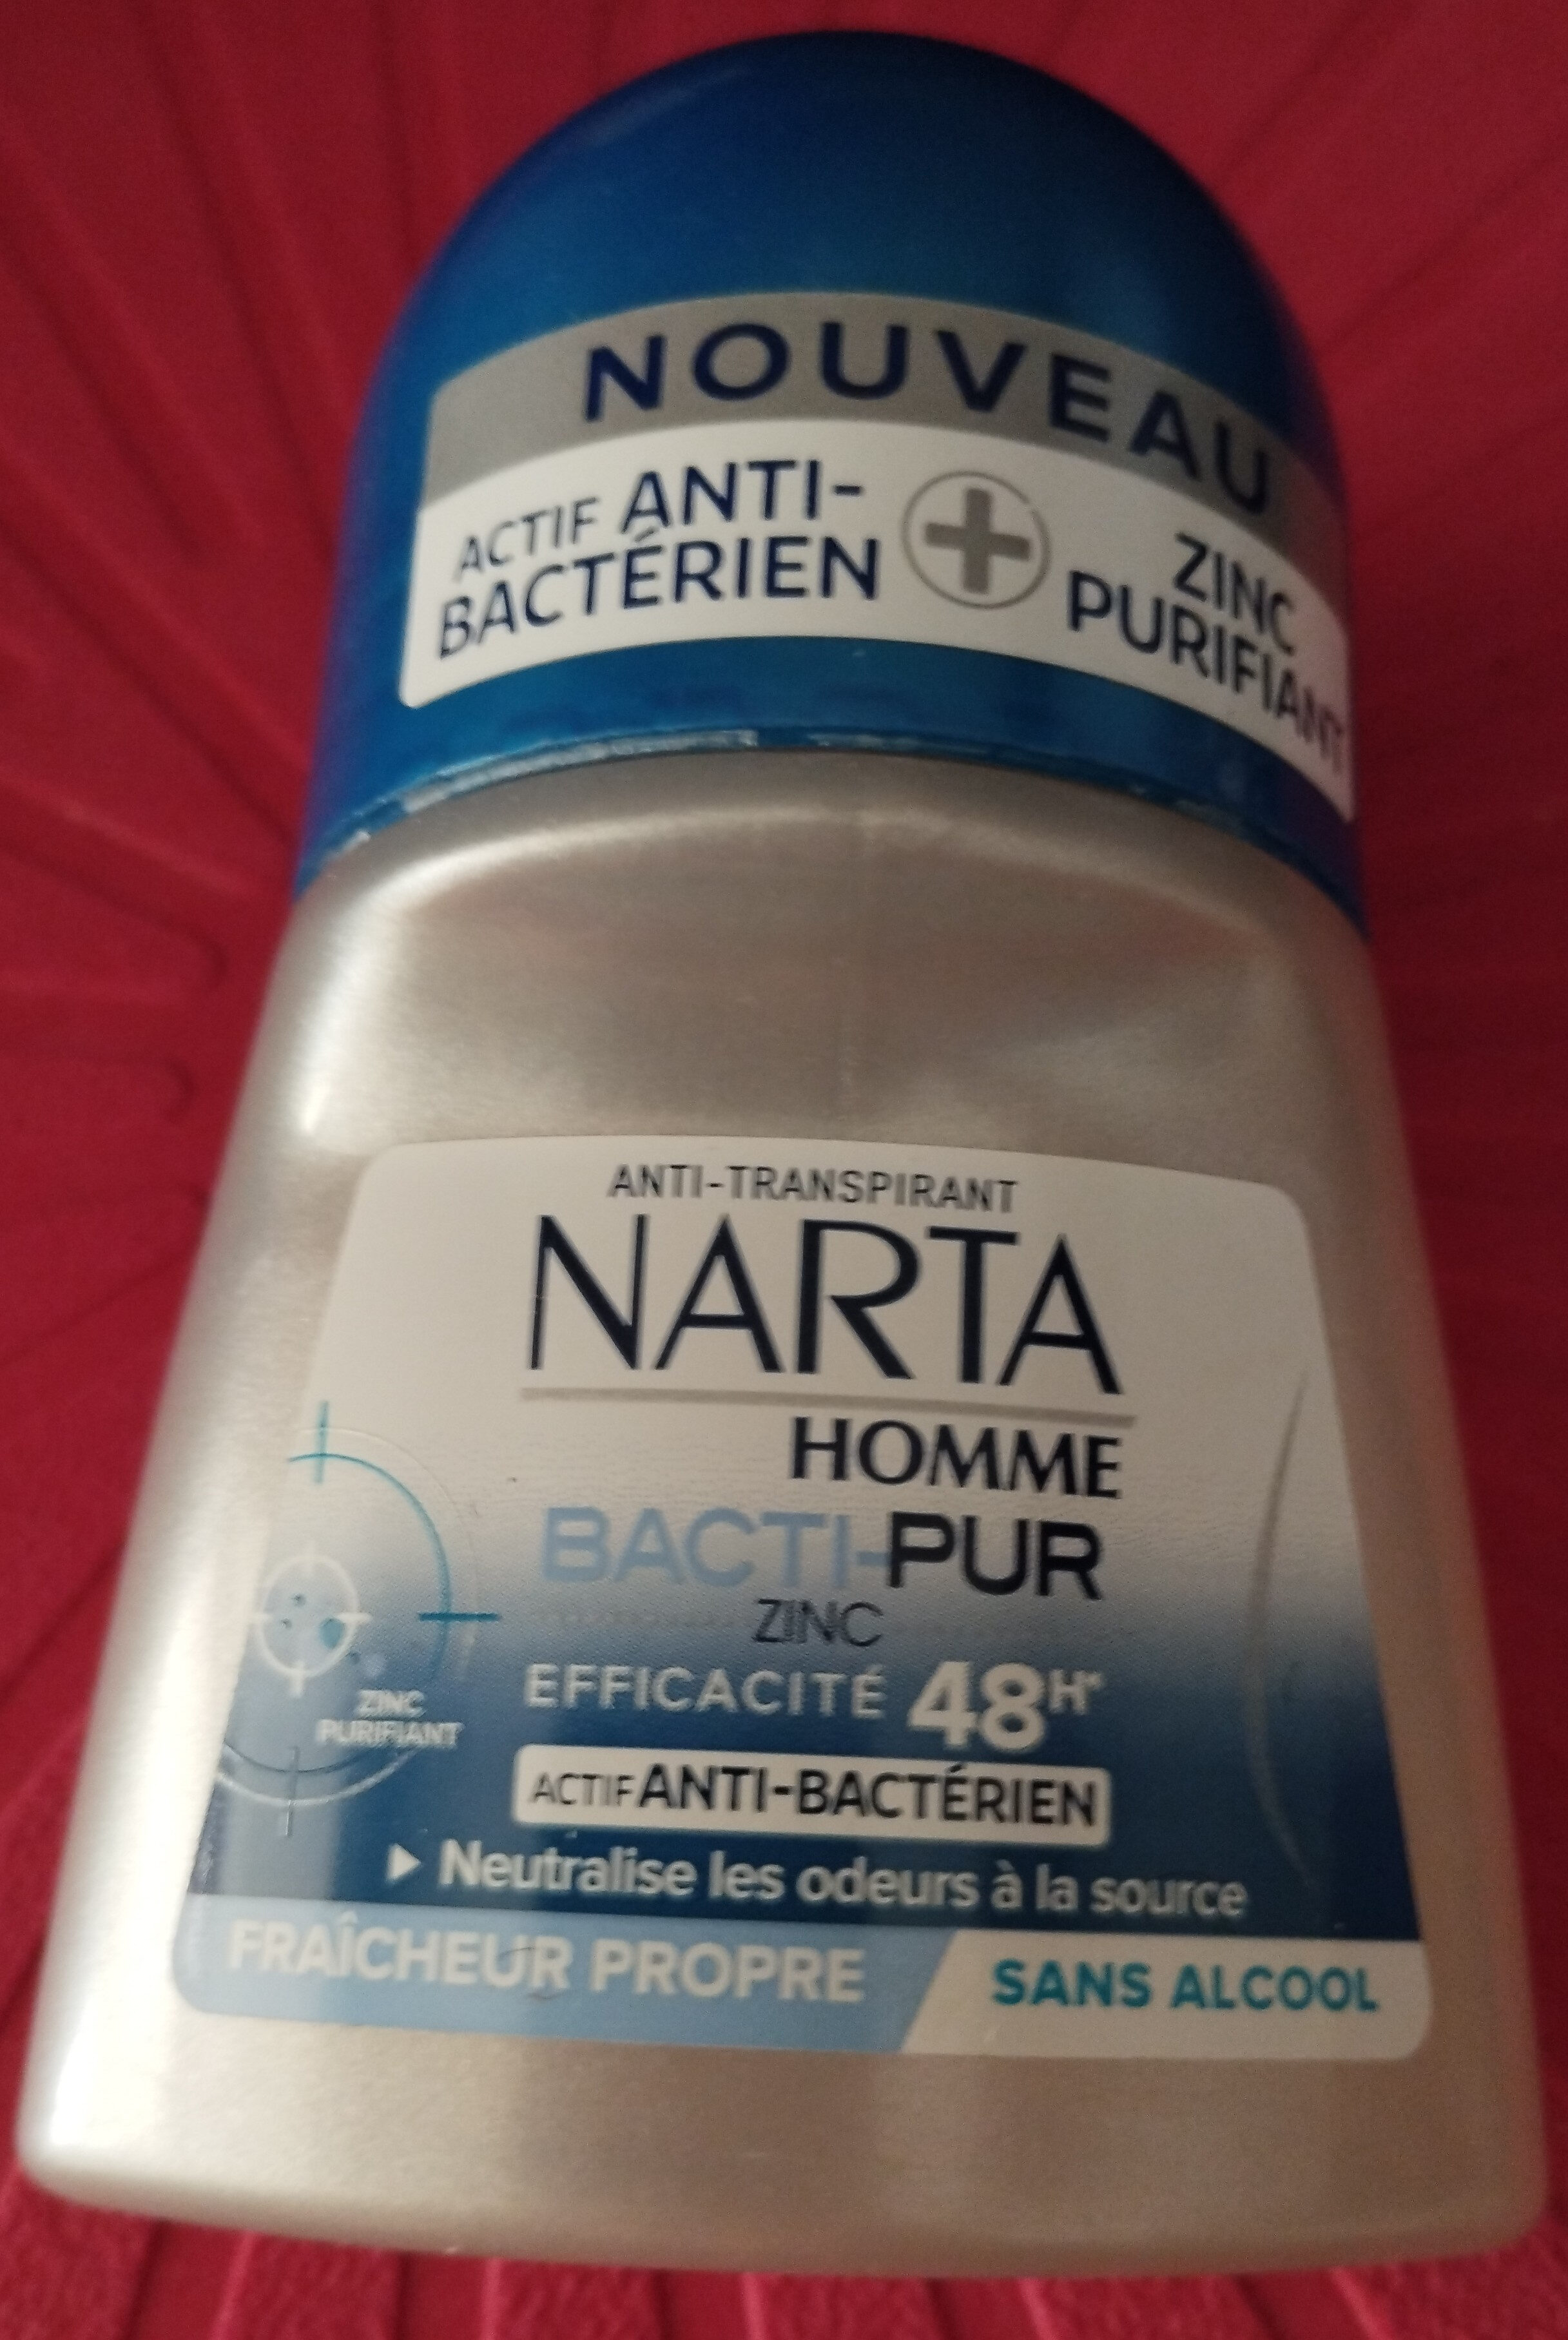 Narta homme Bacti pur 48h - Product - fr